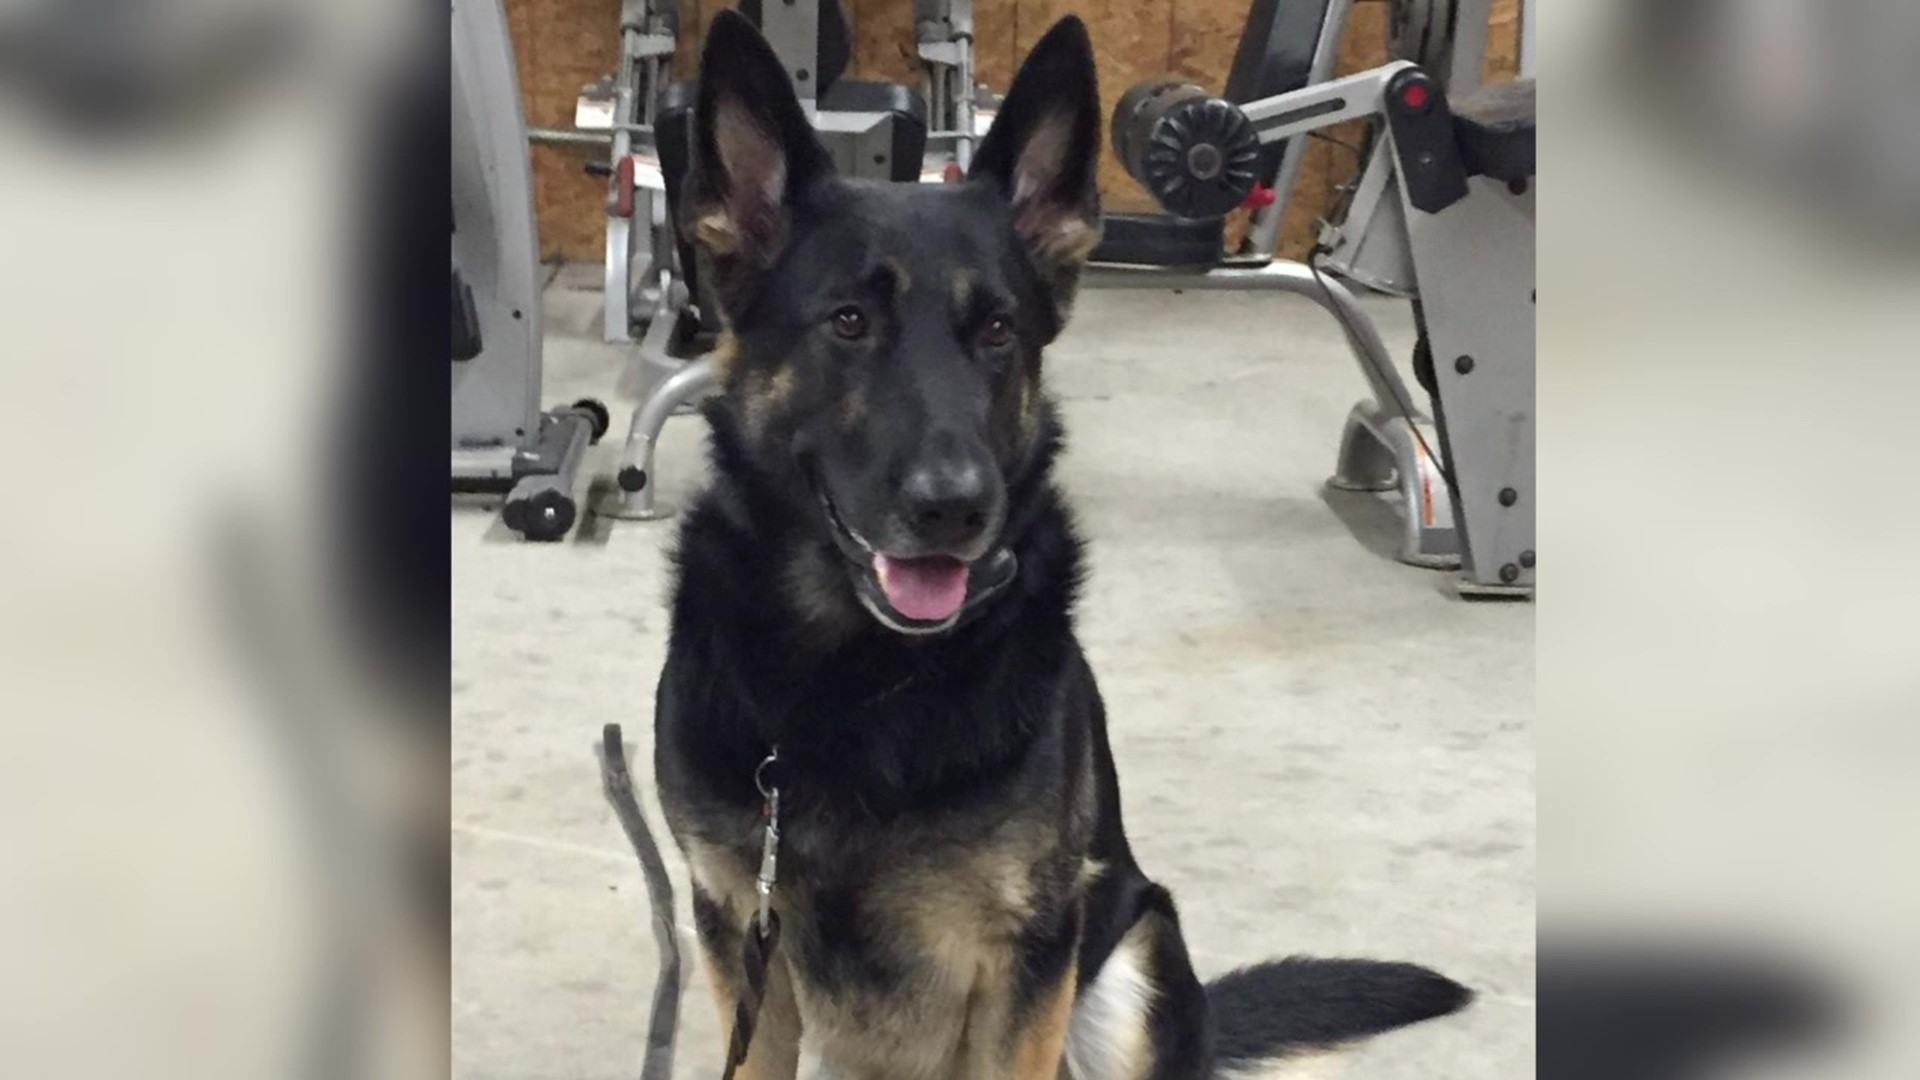 A fundraising effort is underway to help the Pittston police replace K-9 officer Blitz when he retires.